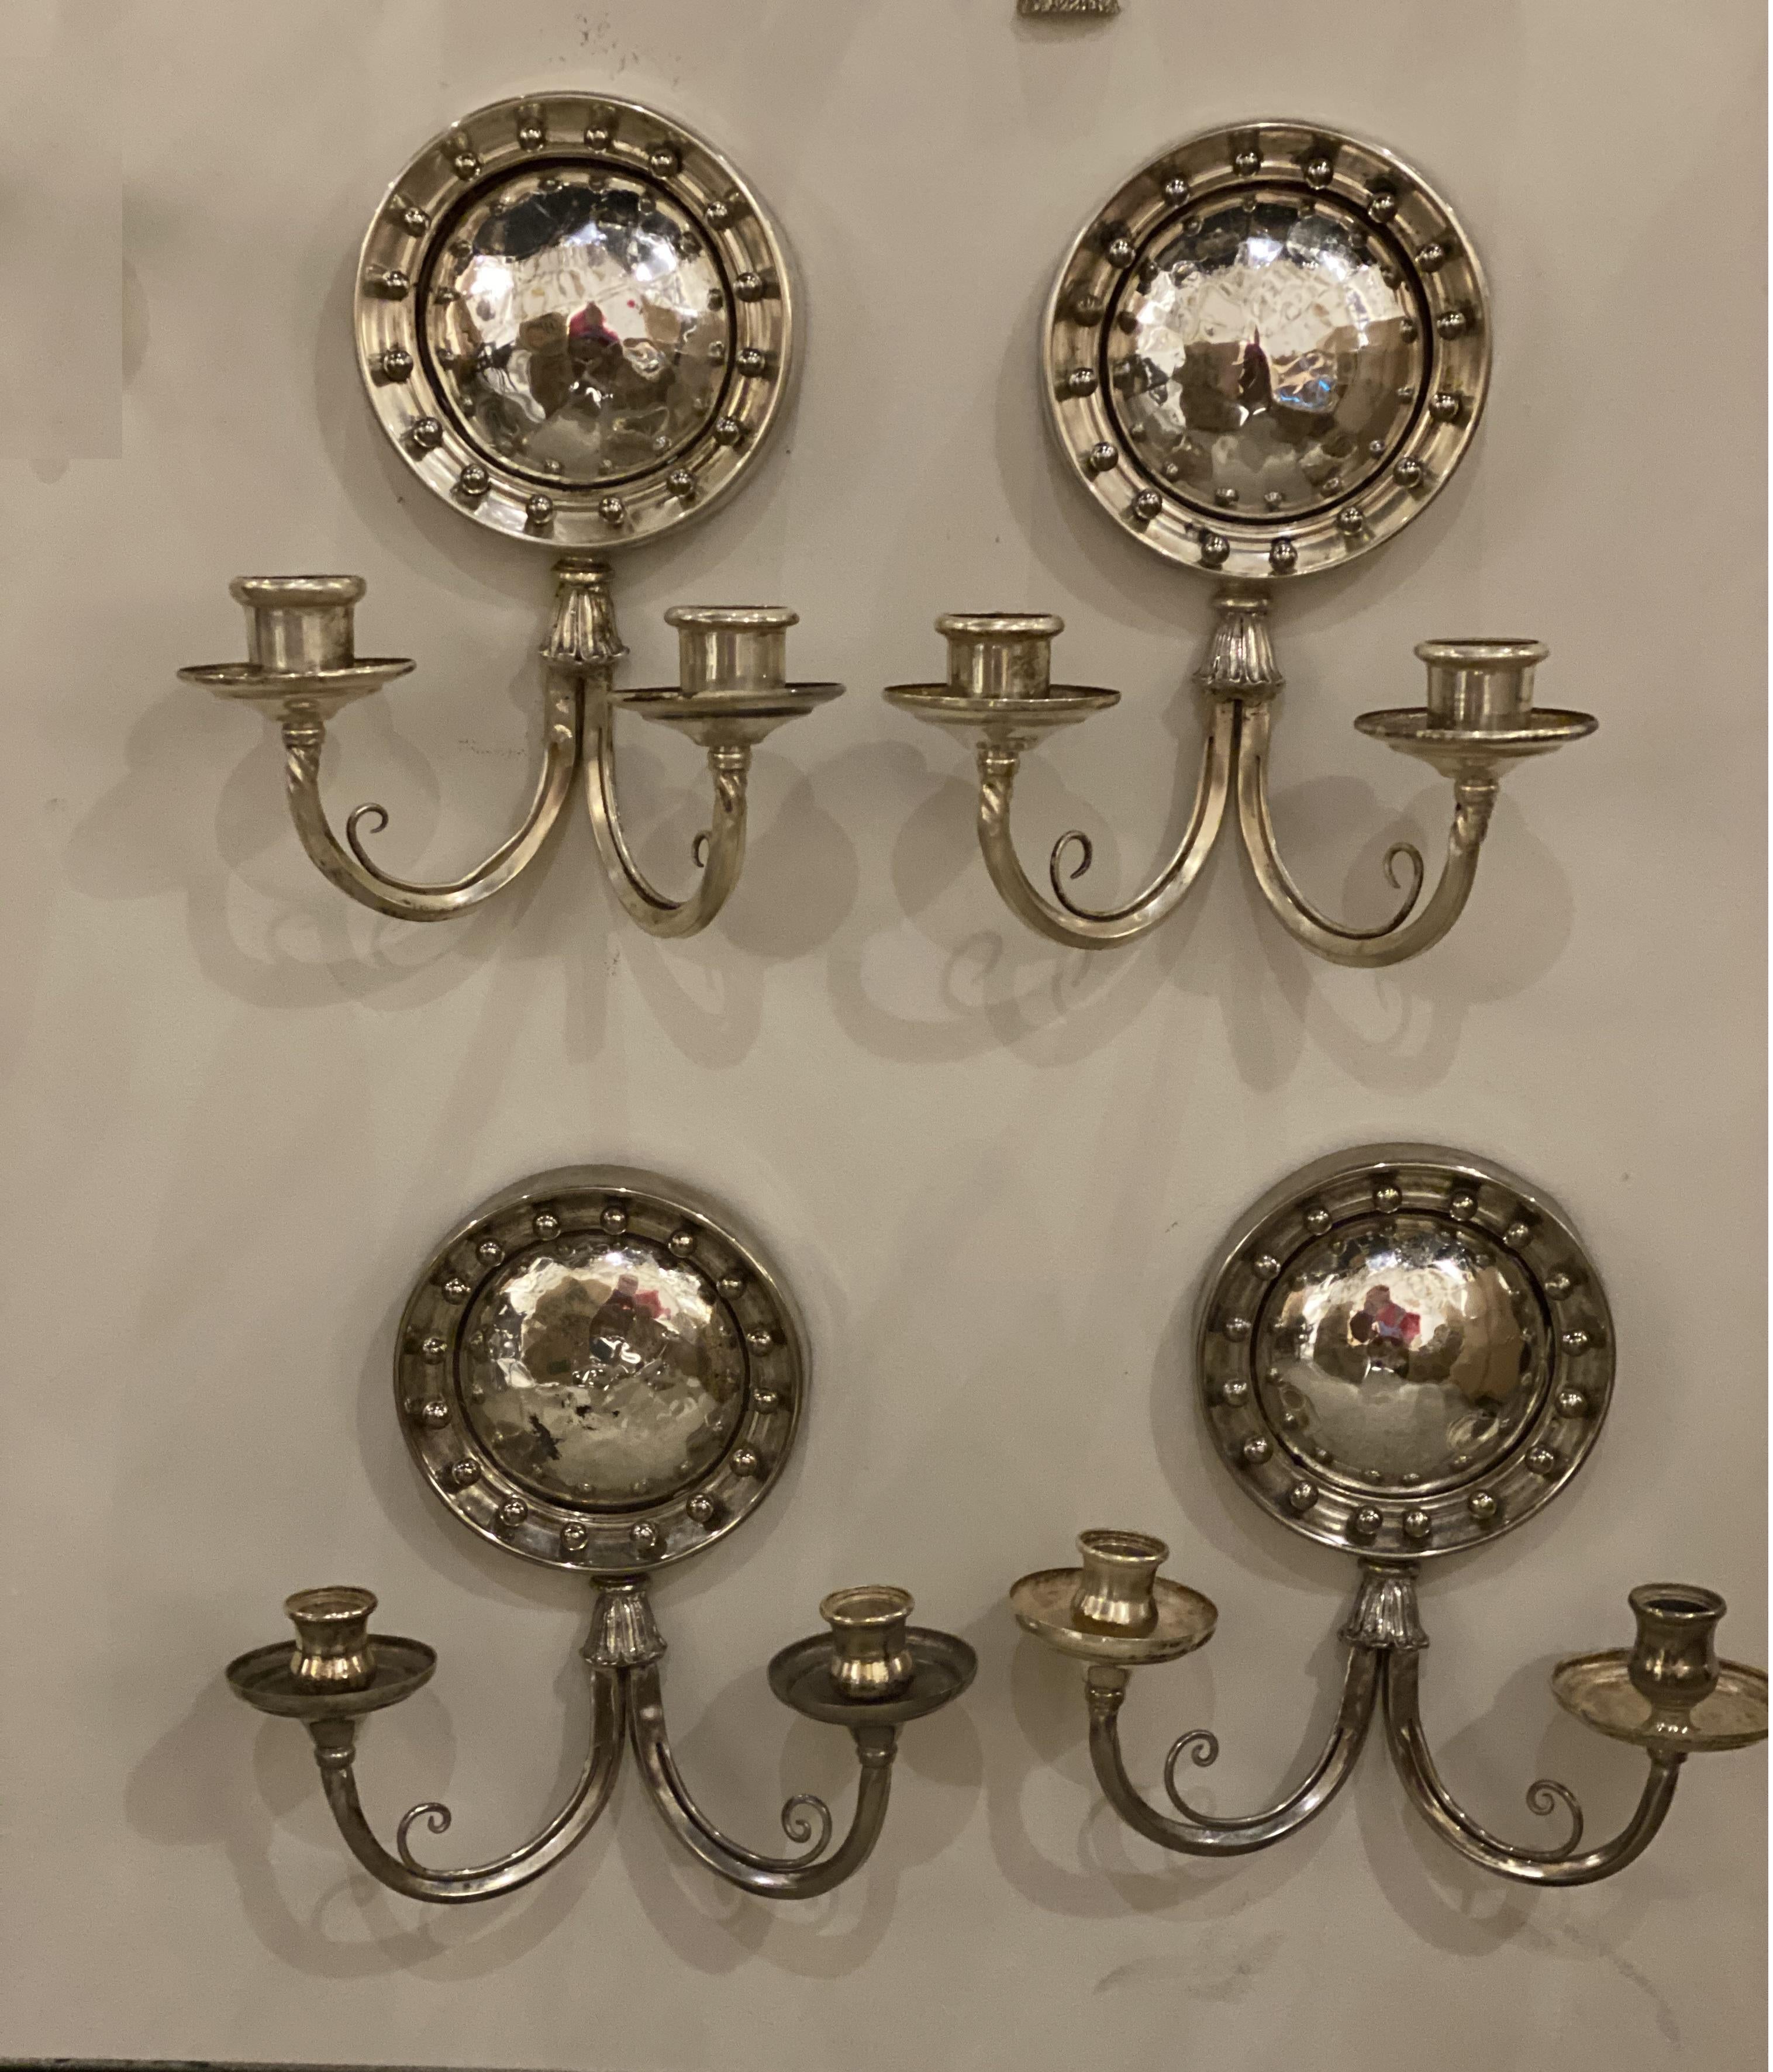 1920s Silver Plated Sconces With Convex Mirrored In Good Condition For Sale In New York, NY